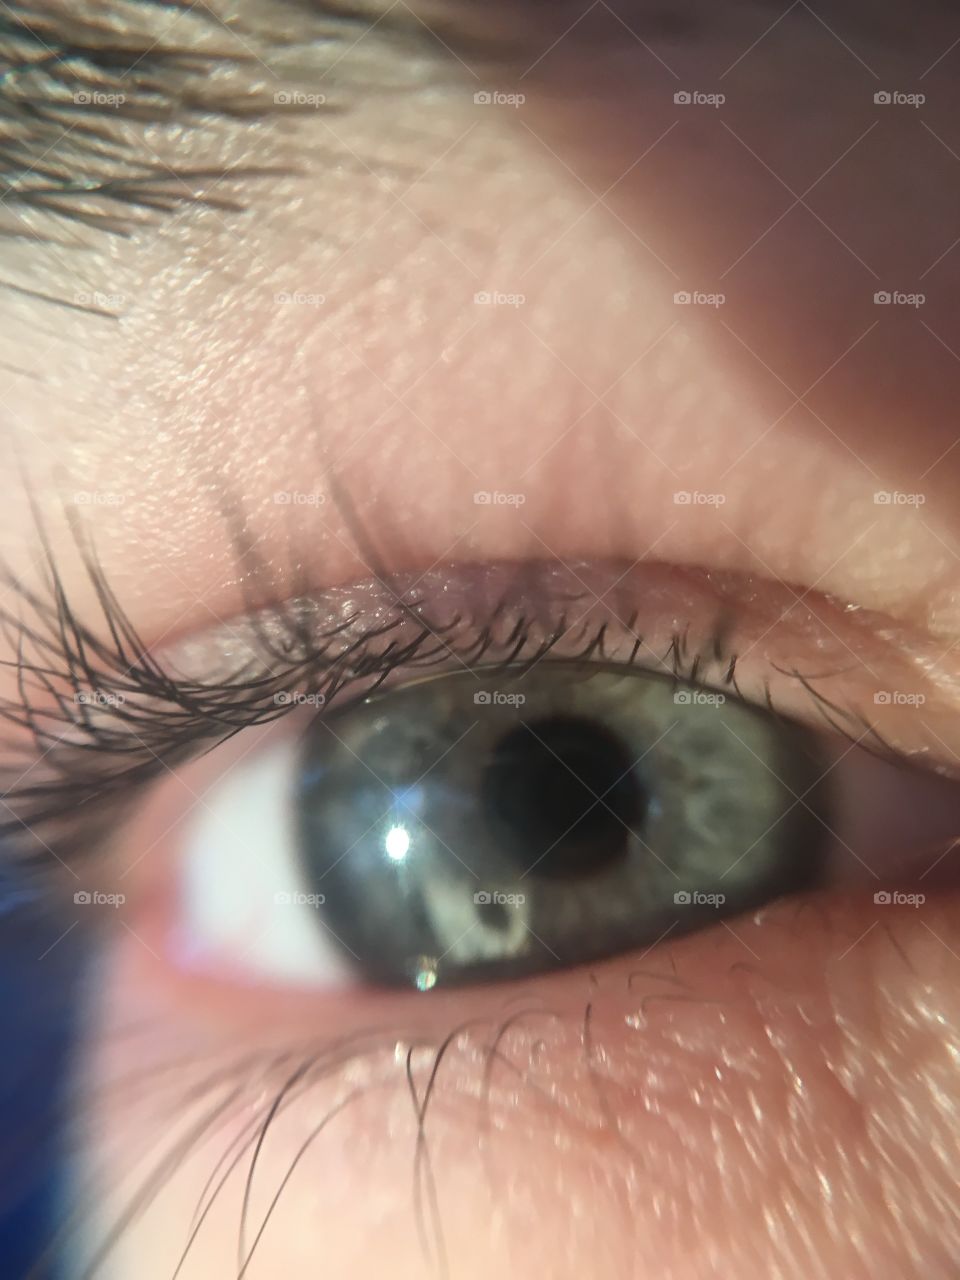 Second shot of my iris, different perspective :)